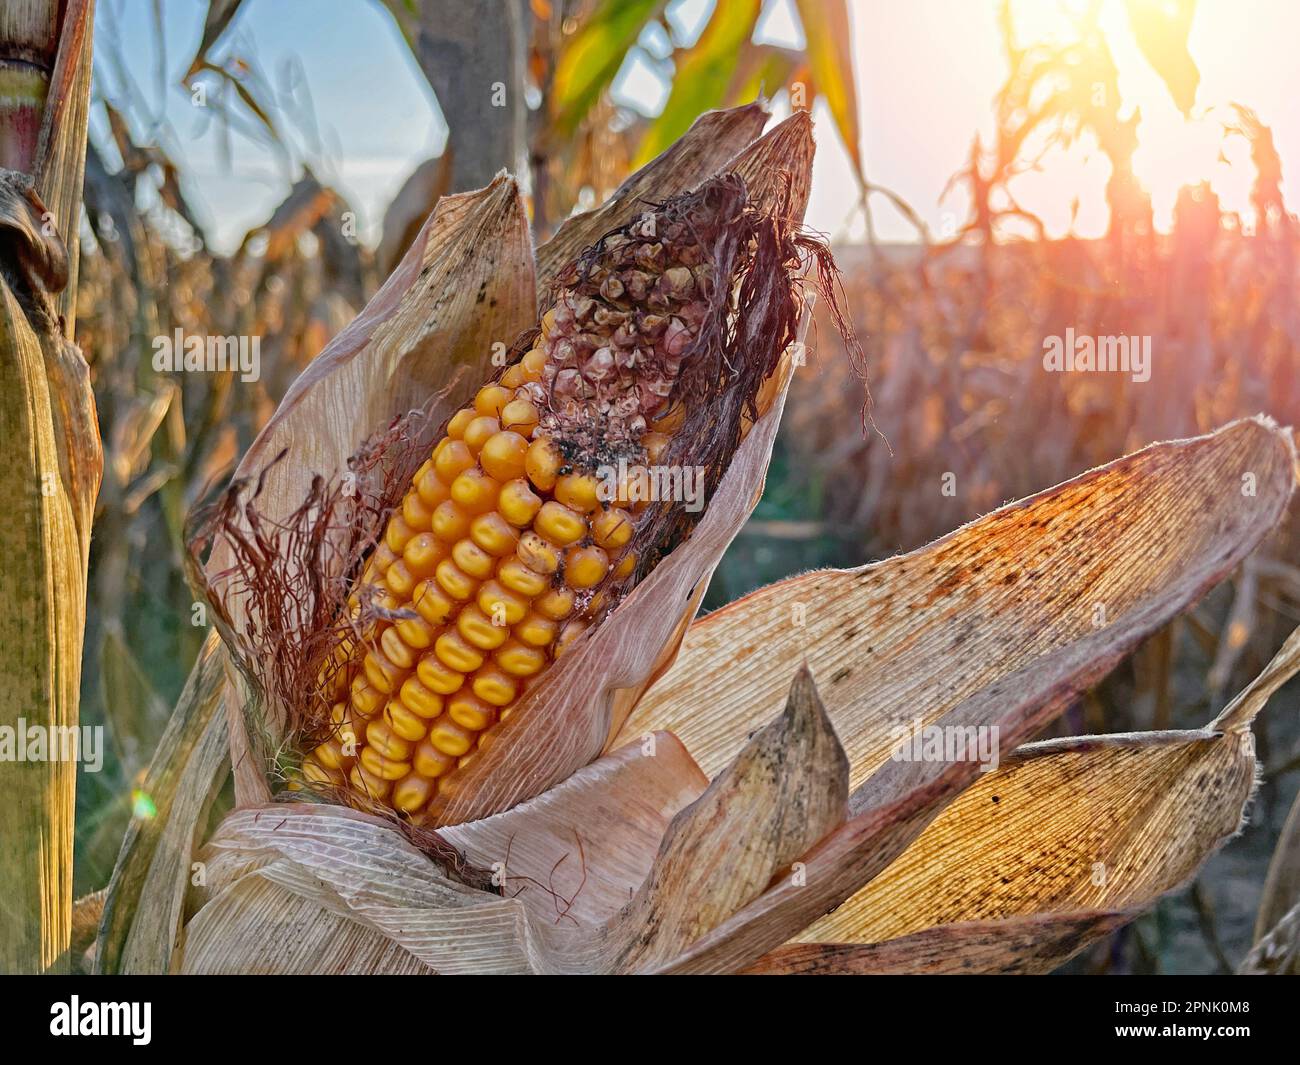 Rotting Close-up yellow ripe corn on stalks for harvest in agricultural cultivated field Stock Photo